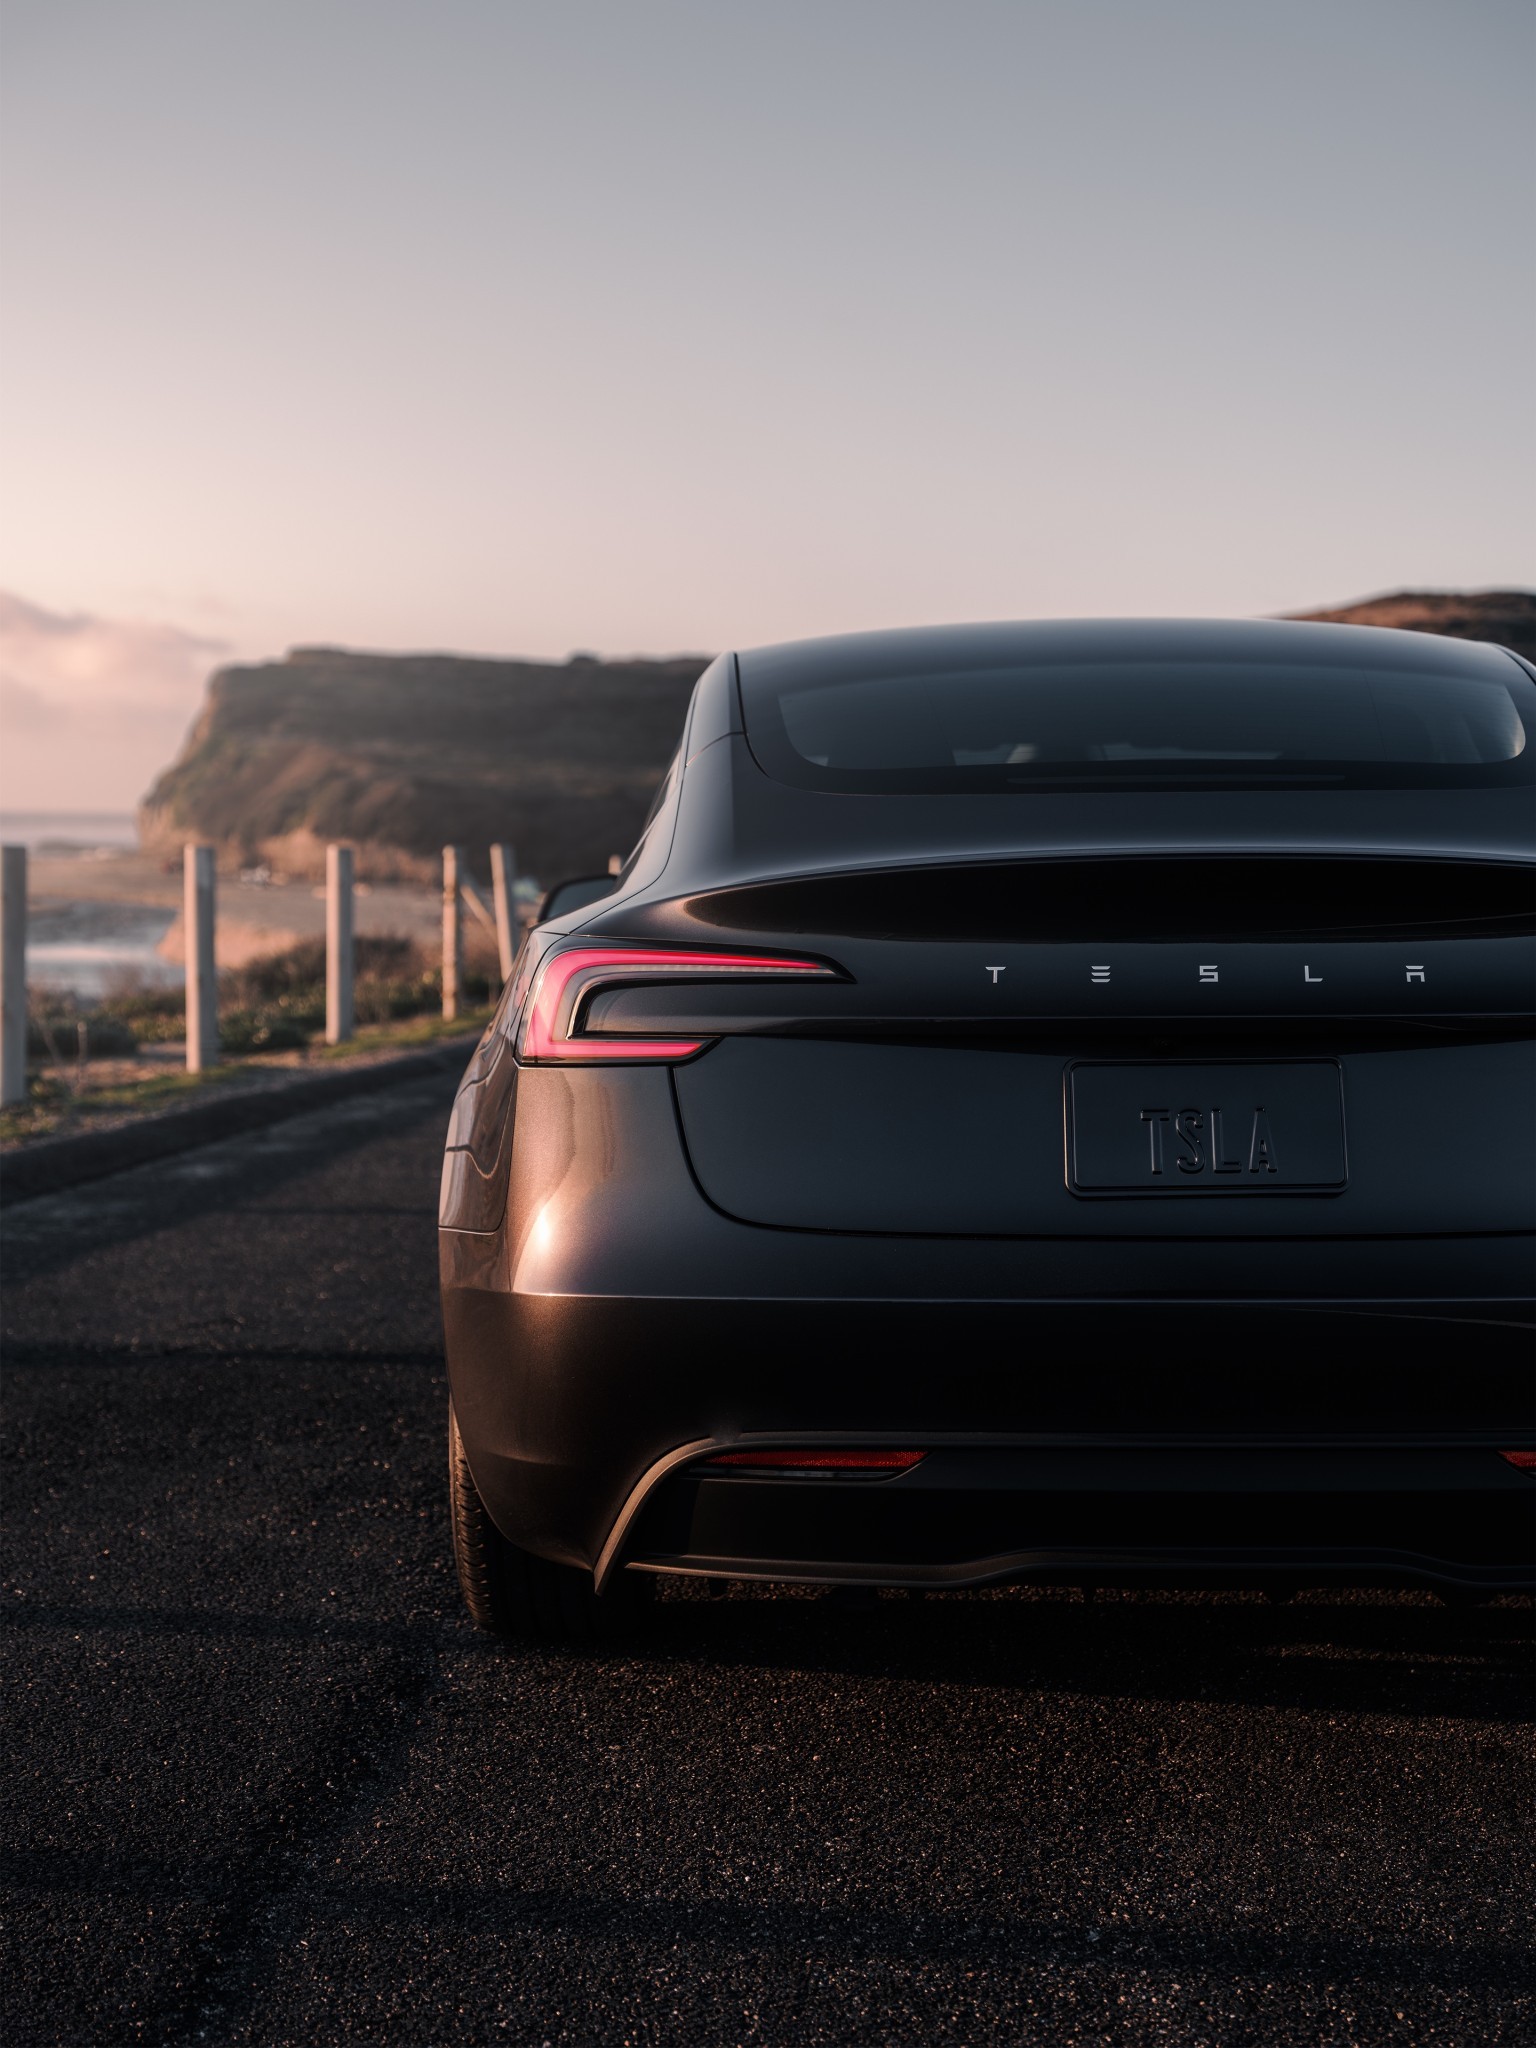 Tesla Model 3 Highland May Be Announced This Month for North